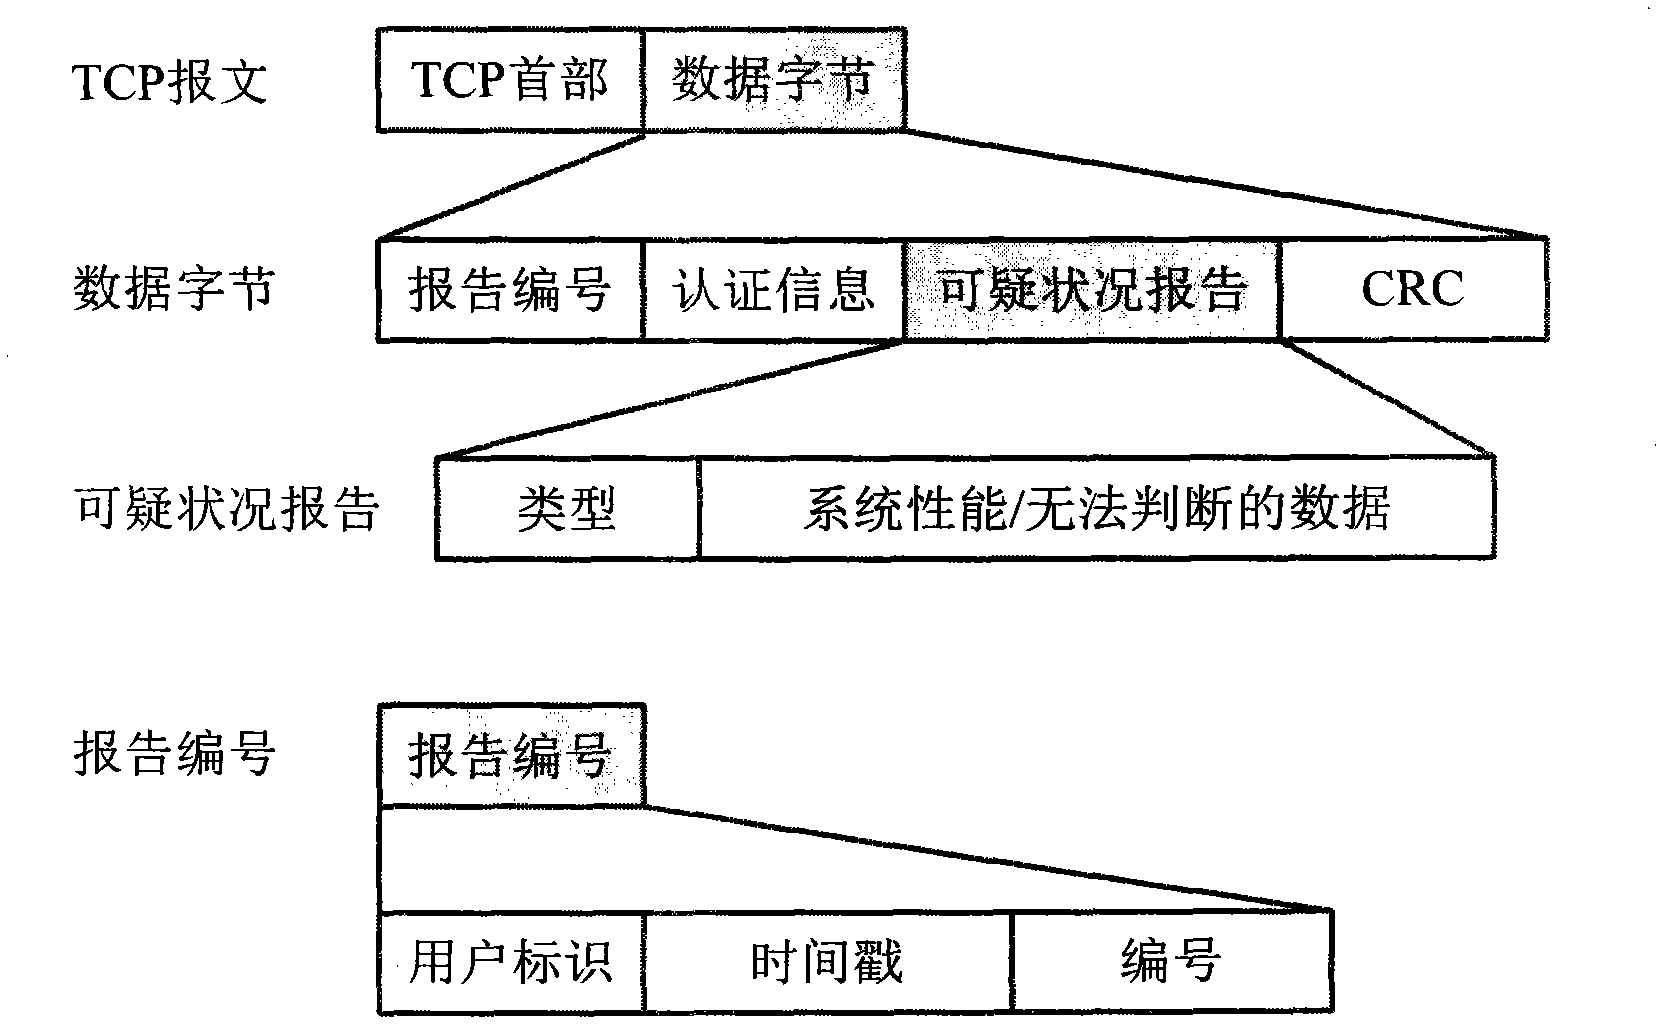 Method for realizing security of network terminal equipment